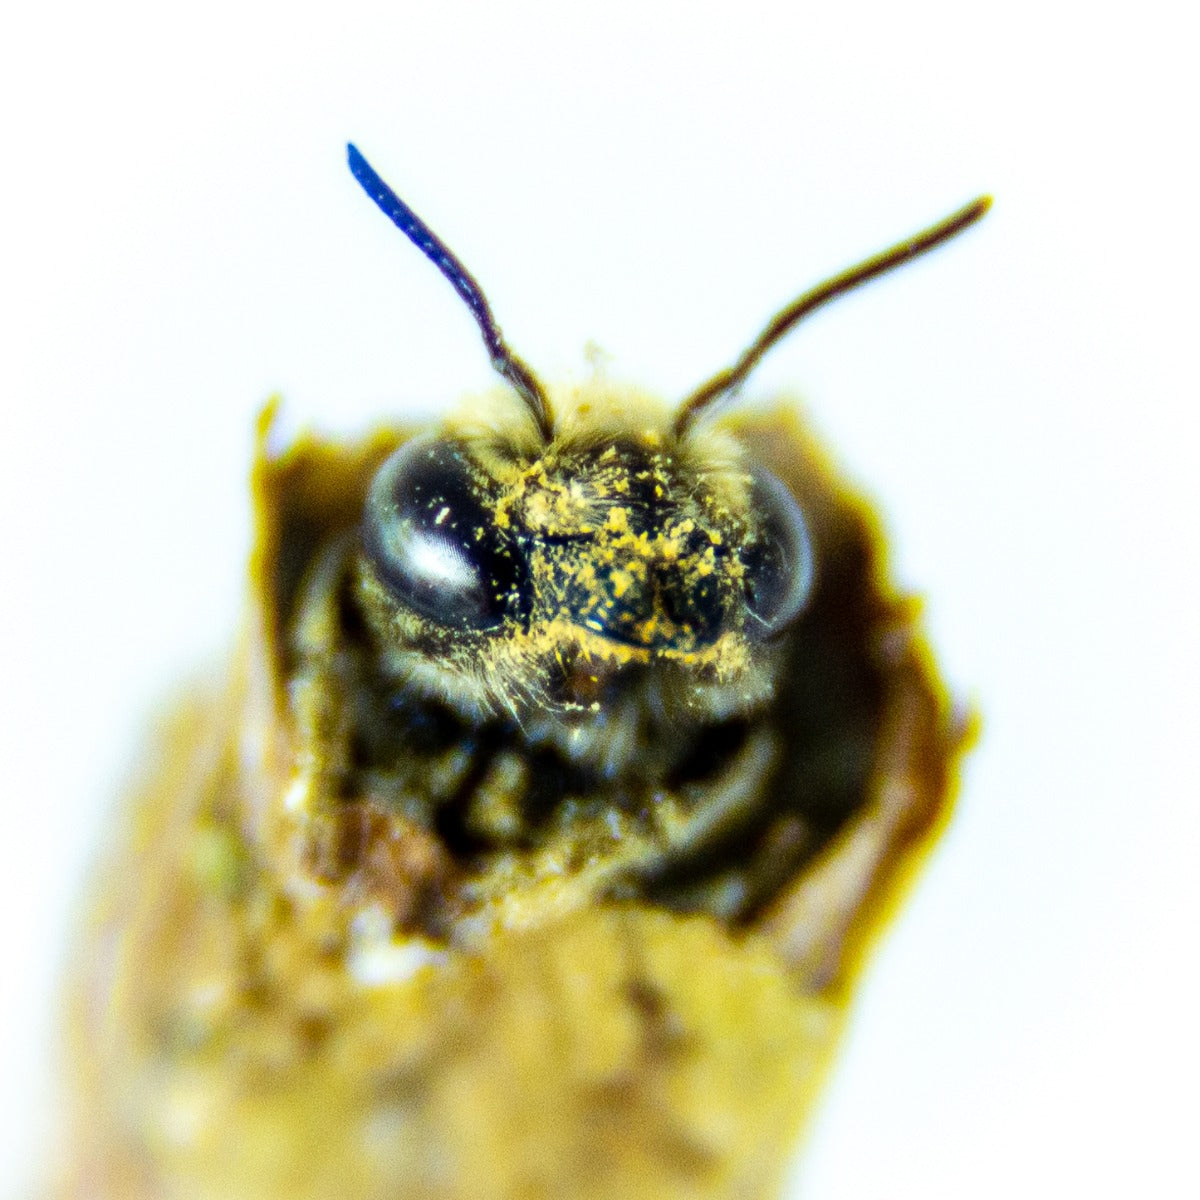 Detailed view of a Leafcutter bee's yellow head emerging from a cocoon